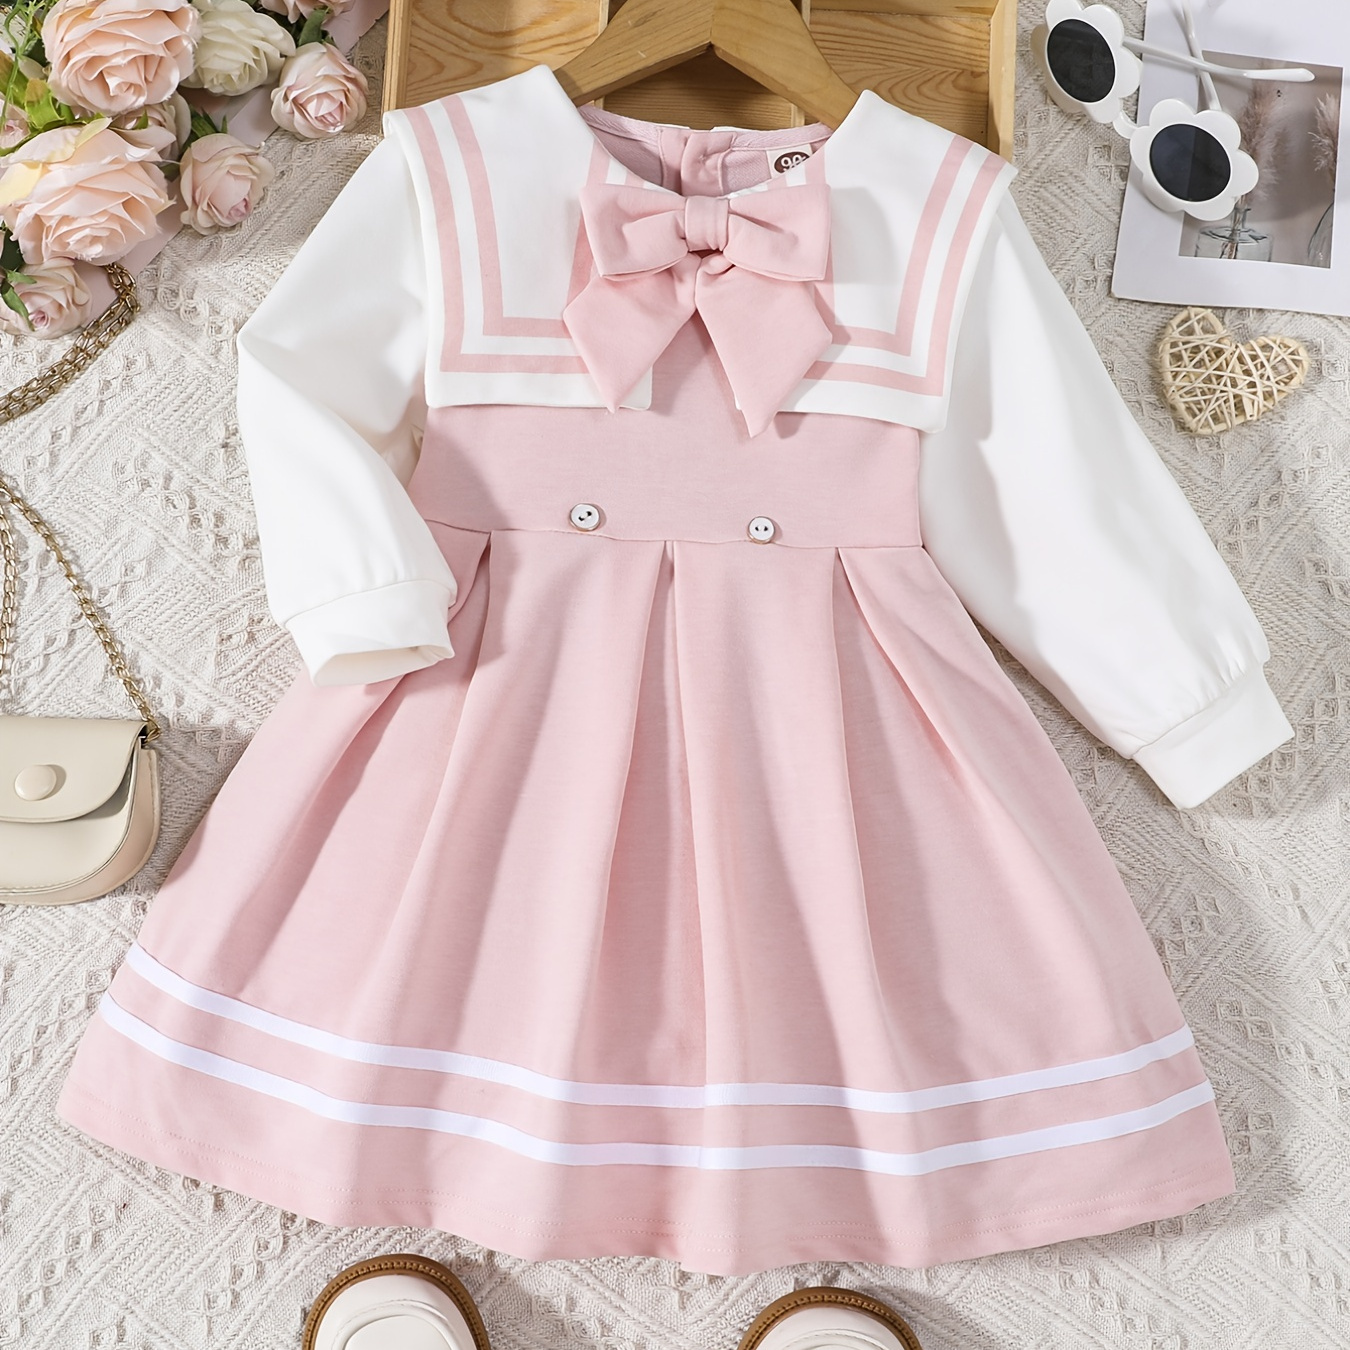 

Girls Casual Cute Stitching Sailor Collar Preppy Princess Dress With Bow Decoration For Autumn And Spring